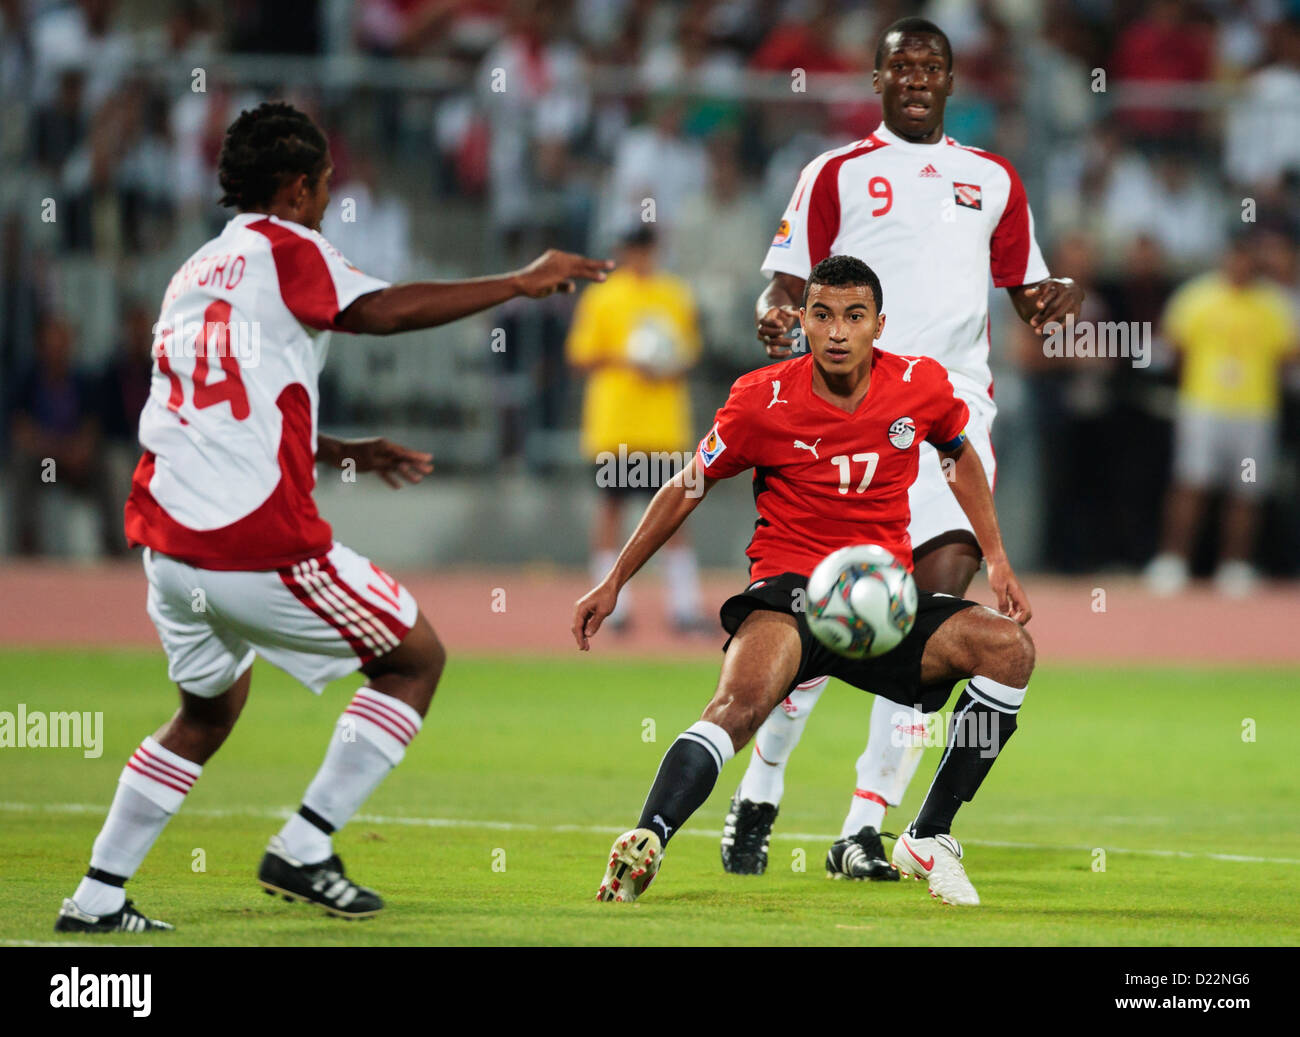 Egypt team captain Mahmoud Toba (17) in action during the opening match of the FIFA U-20 World Cup against Trinidad and Tobago. Stock Photo